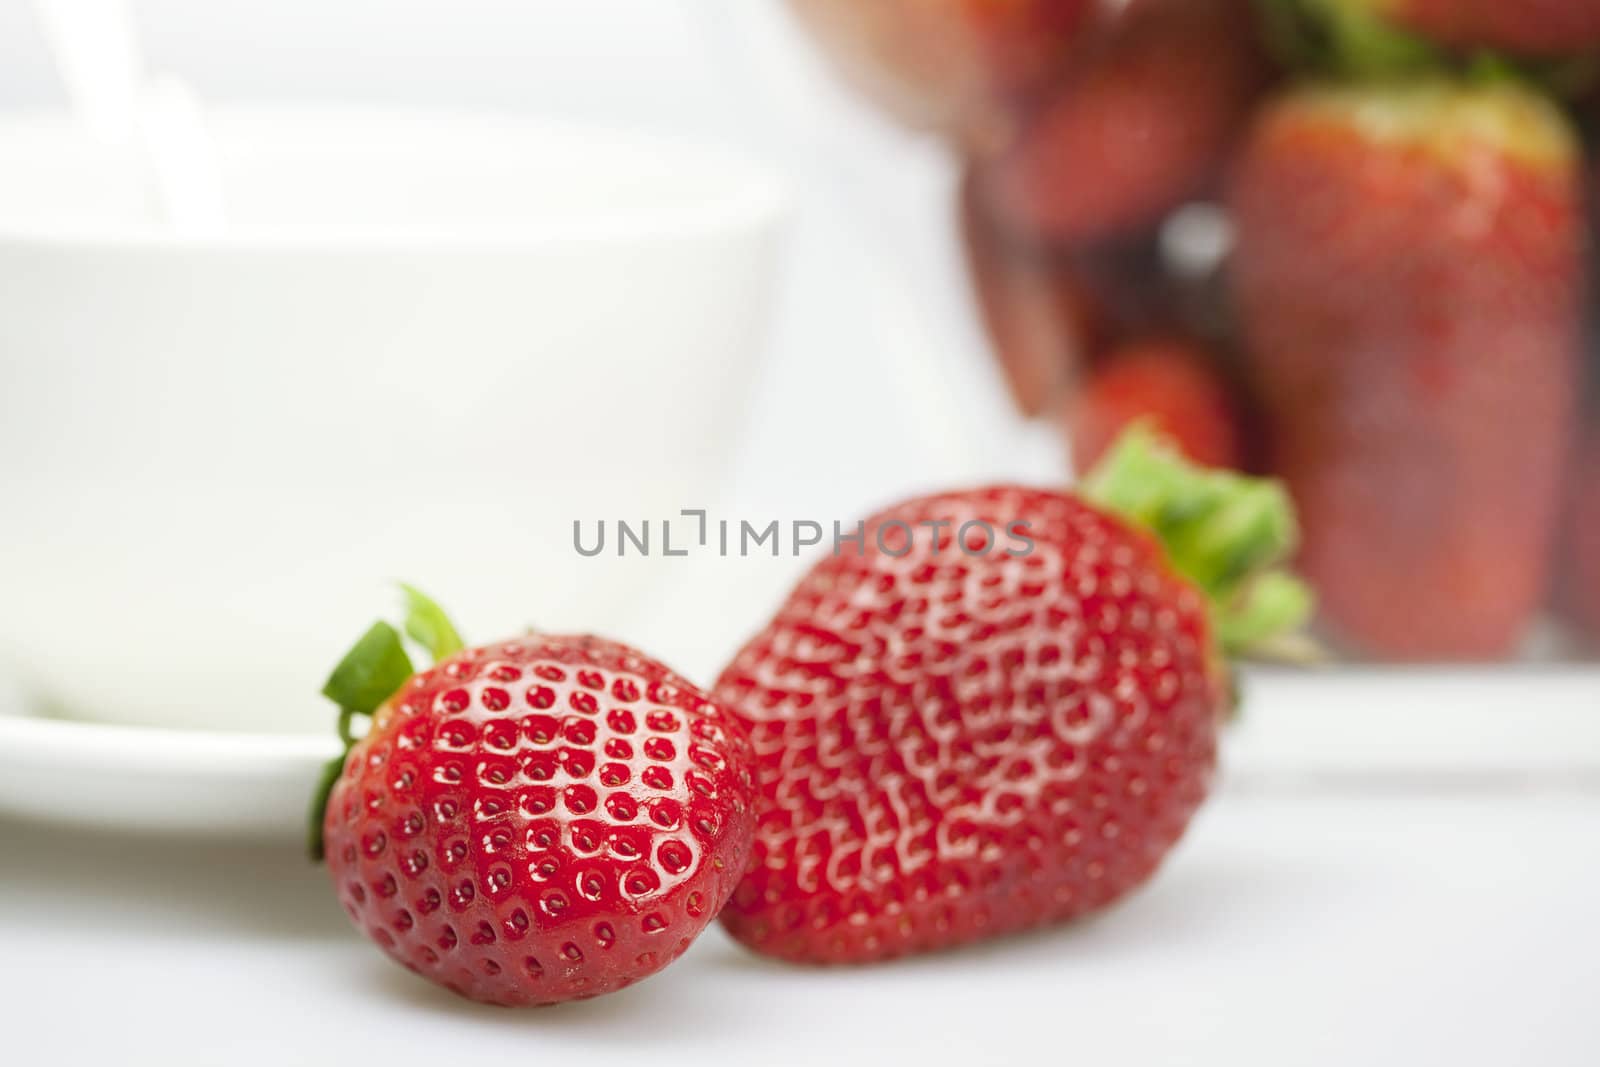 juicy strawberries and a cup isolated on white by jannyjus